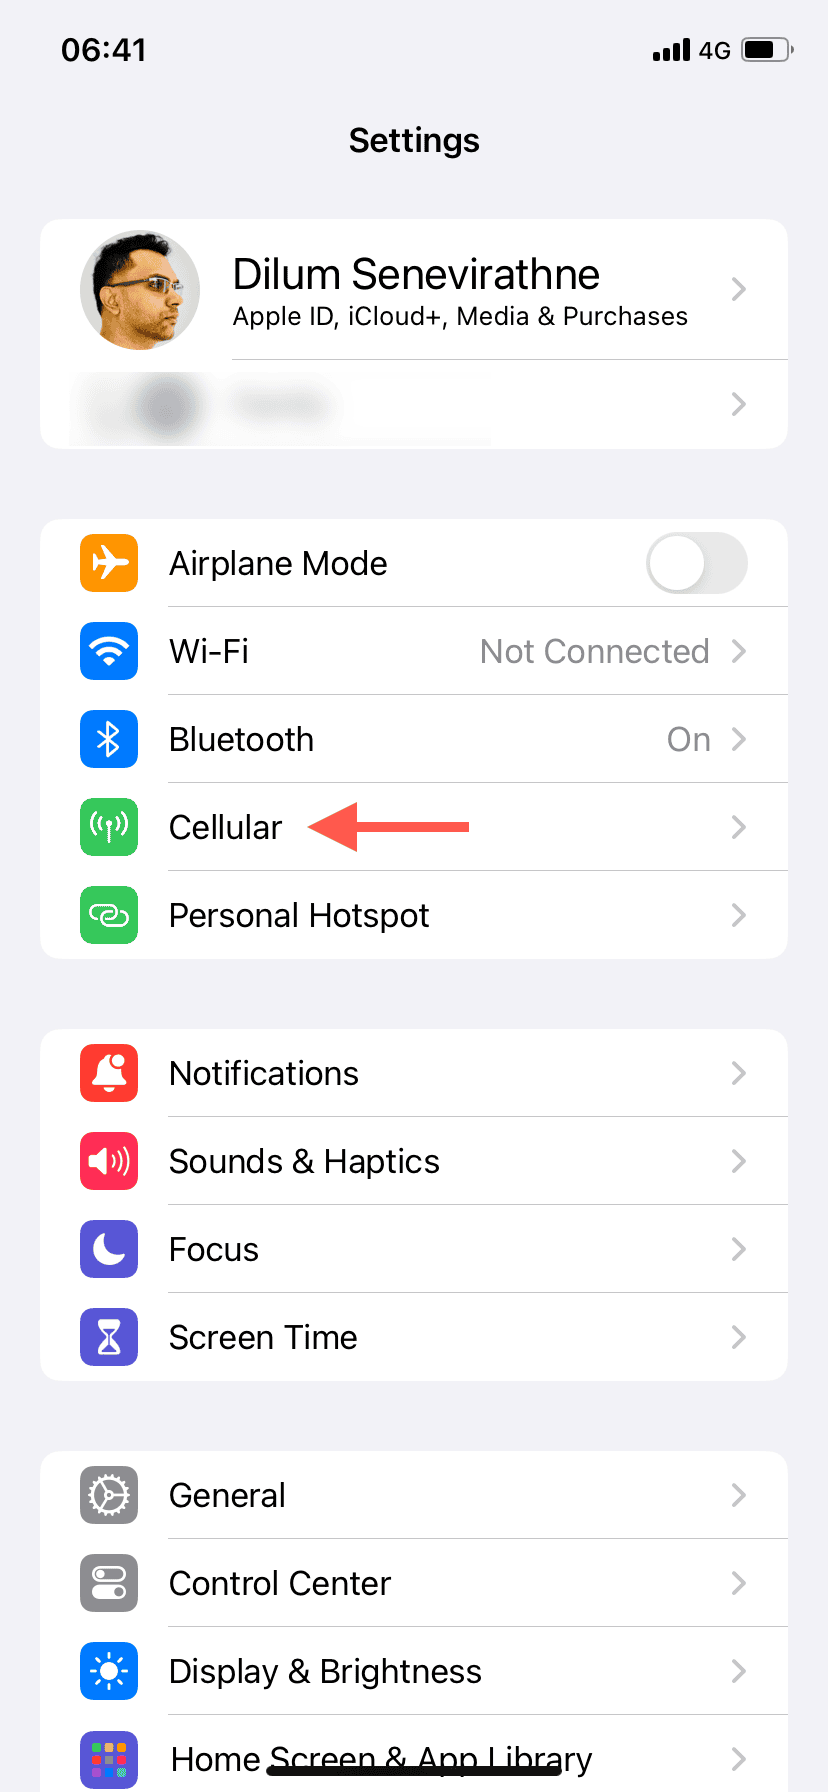 The Cellular option highlighted in the iPhone's Settings app.